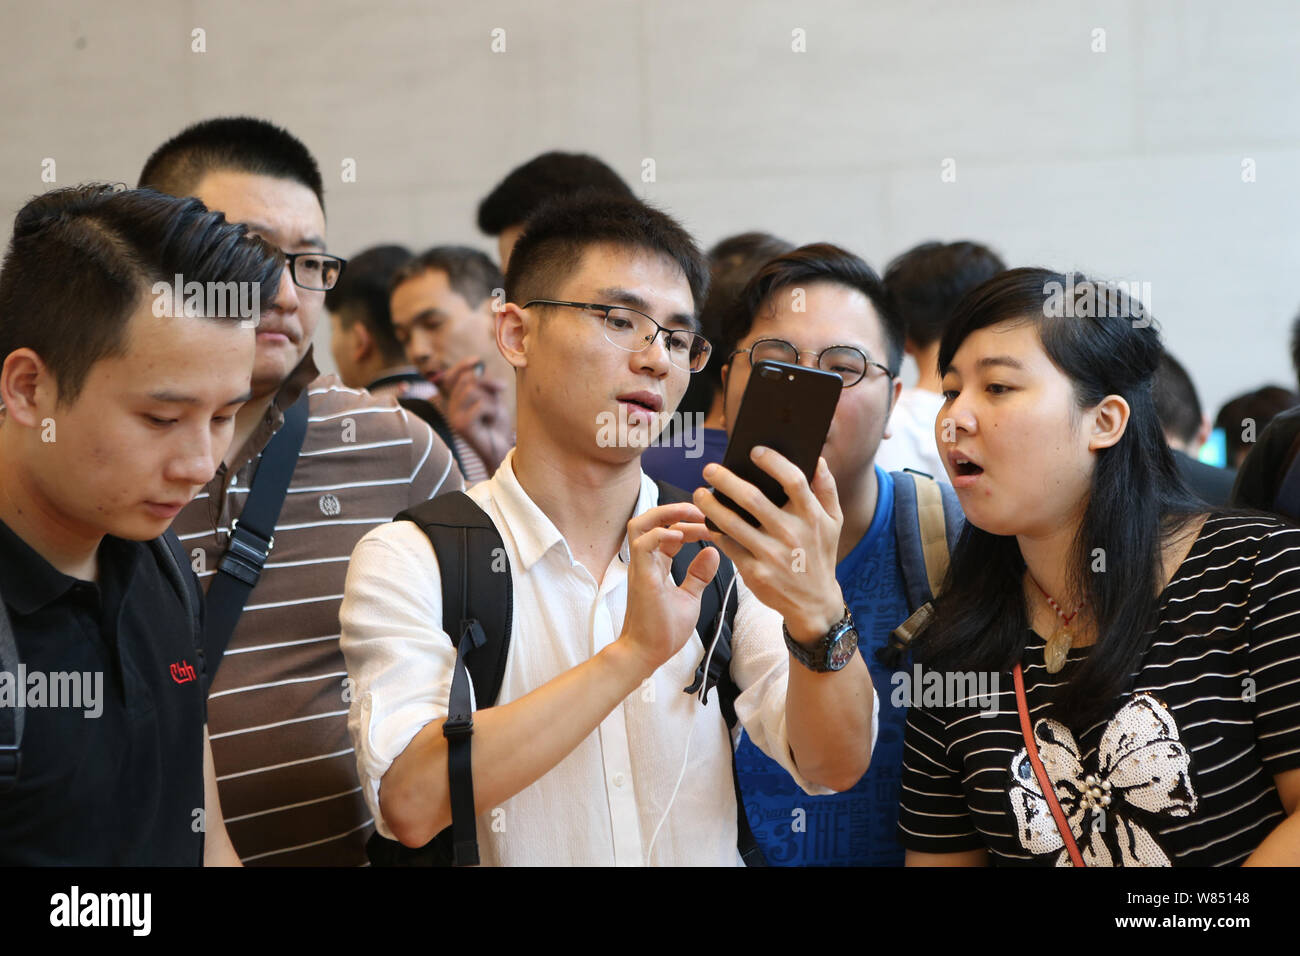 A shopper tries out an iPhone 7 Plus smartphone at an Apple Store in Shanghai, China, 16 September 2016.   Apple Inc fans from Sydney to Shanghai, the Stock Photo